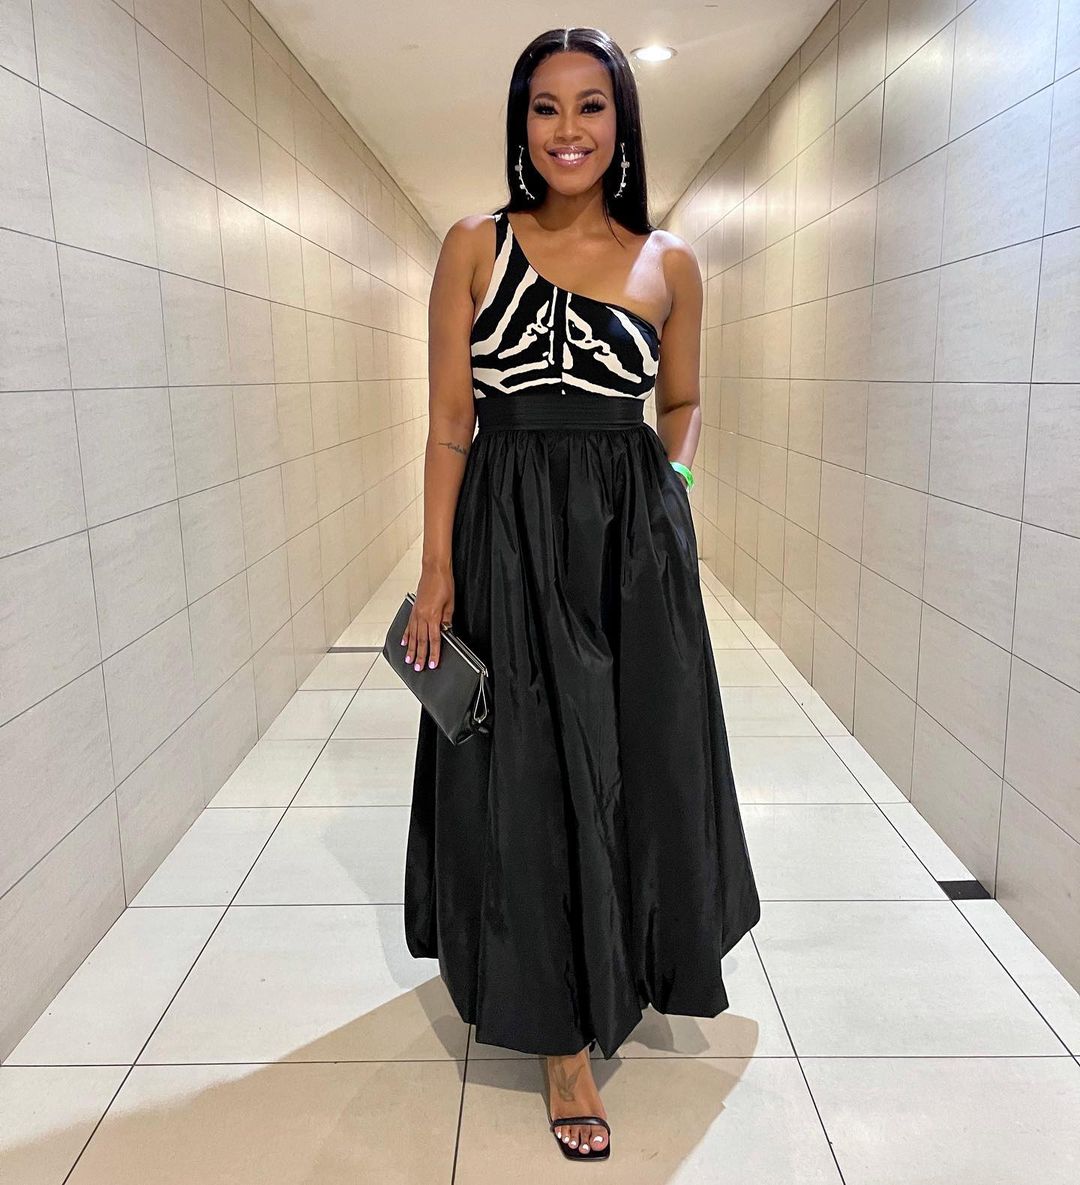 Tshepi Vundla’s sweetest message to her Baby – Photos